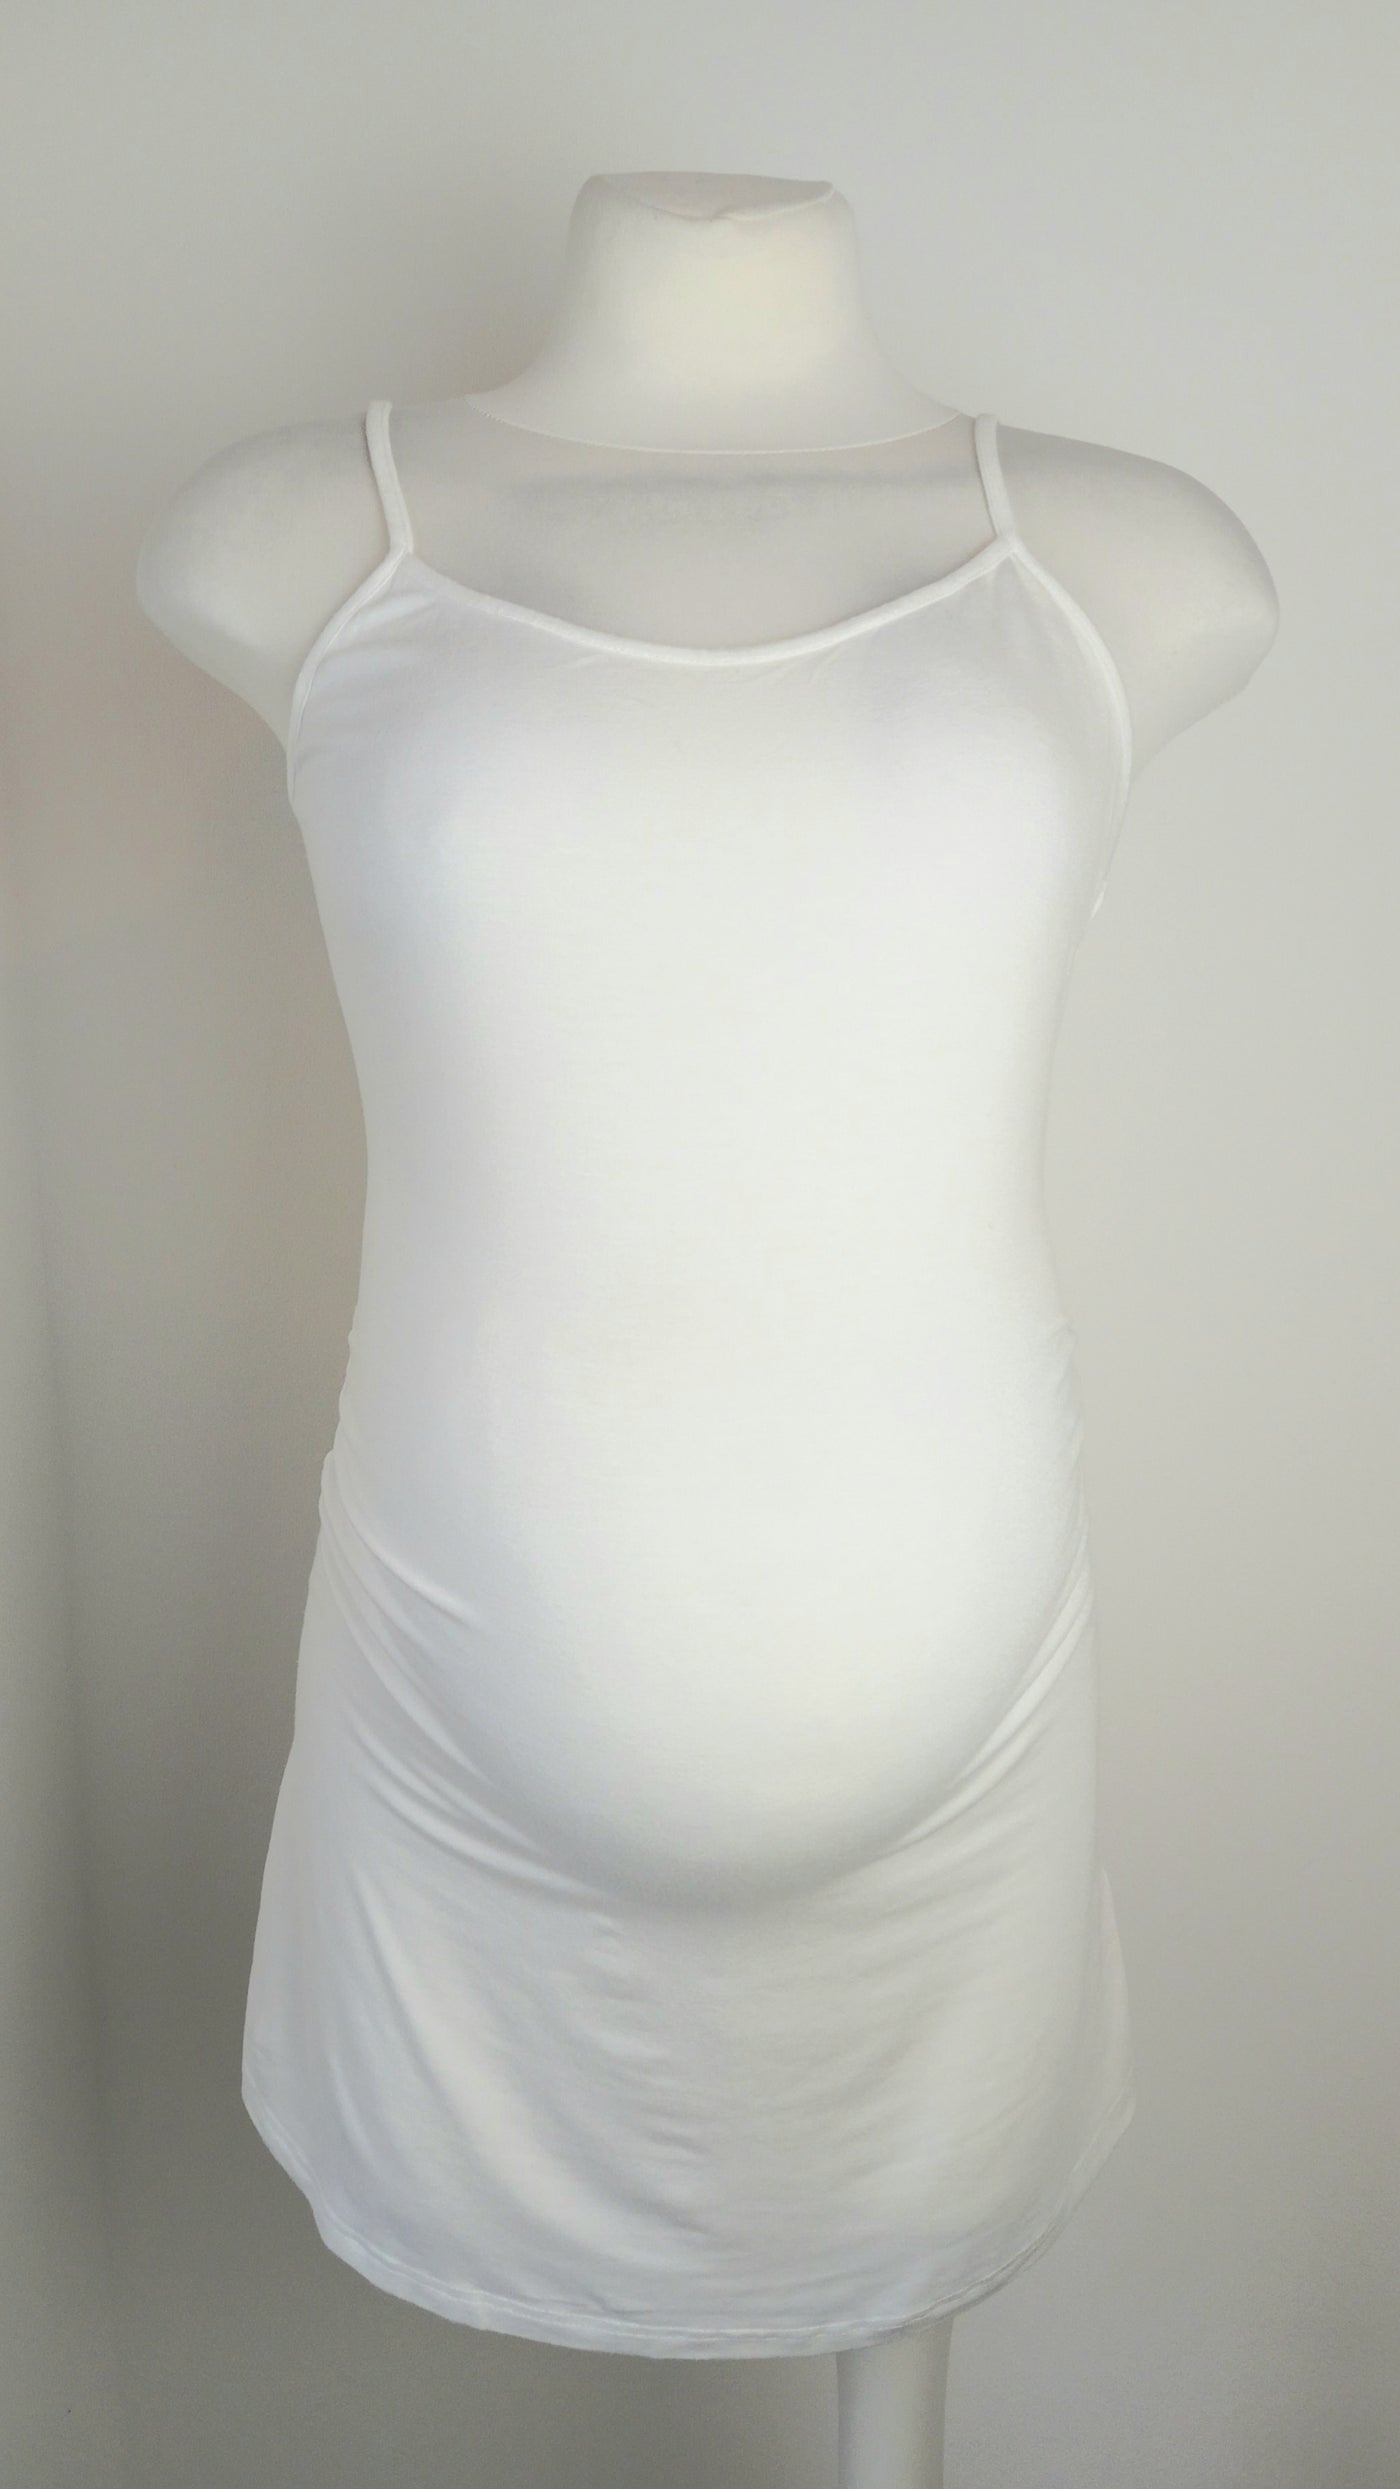 Seraphine White camisole long length maternity top - Size 8/10